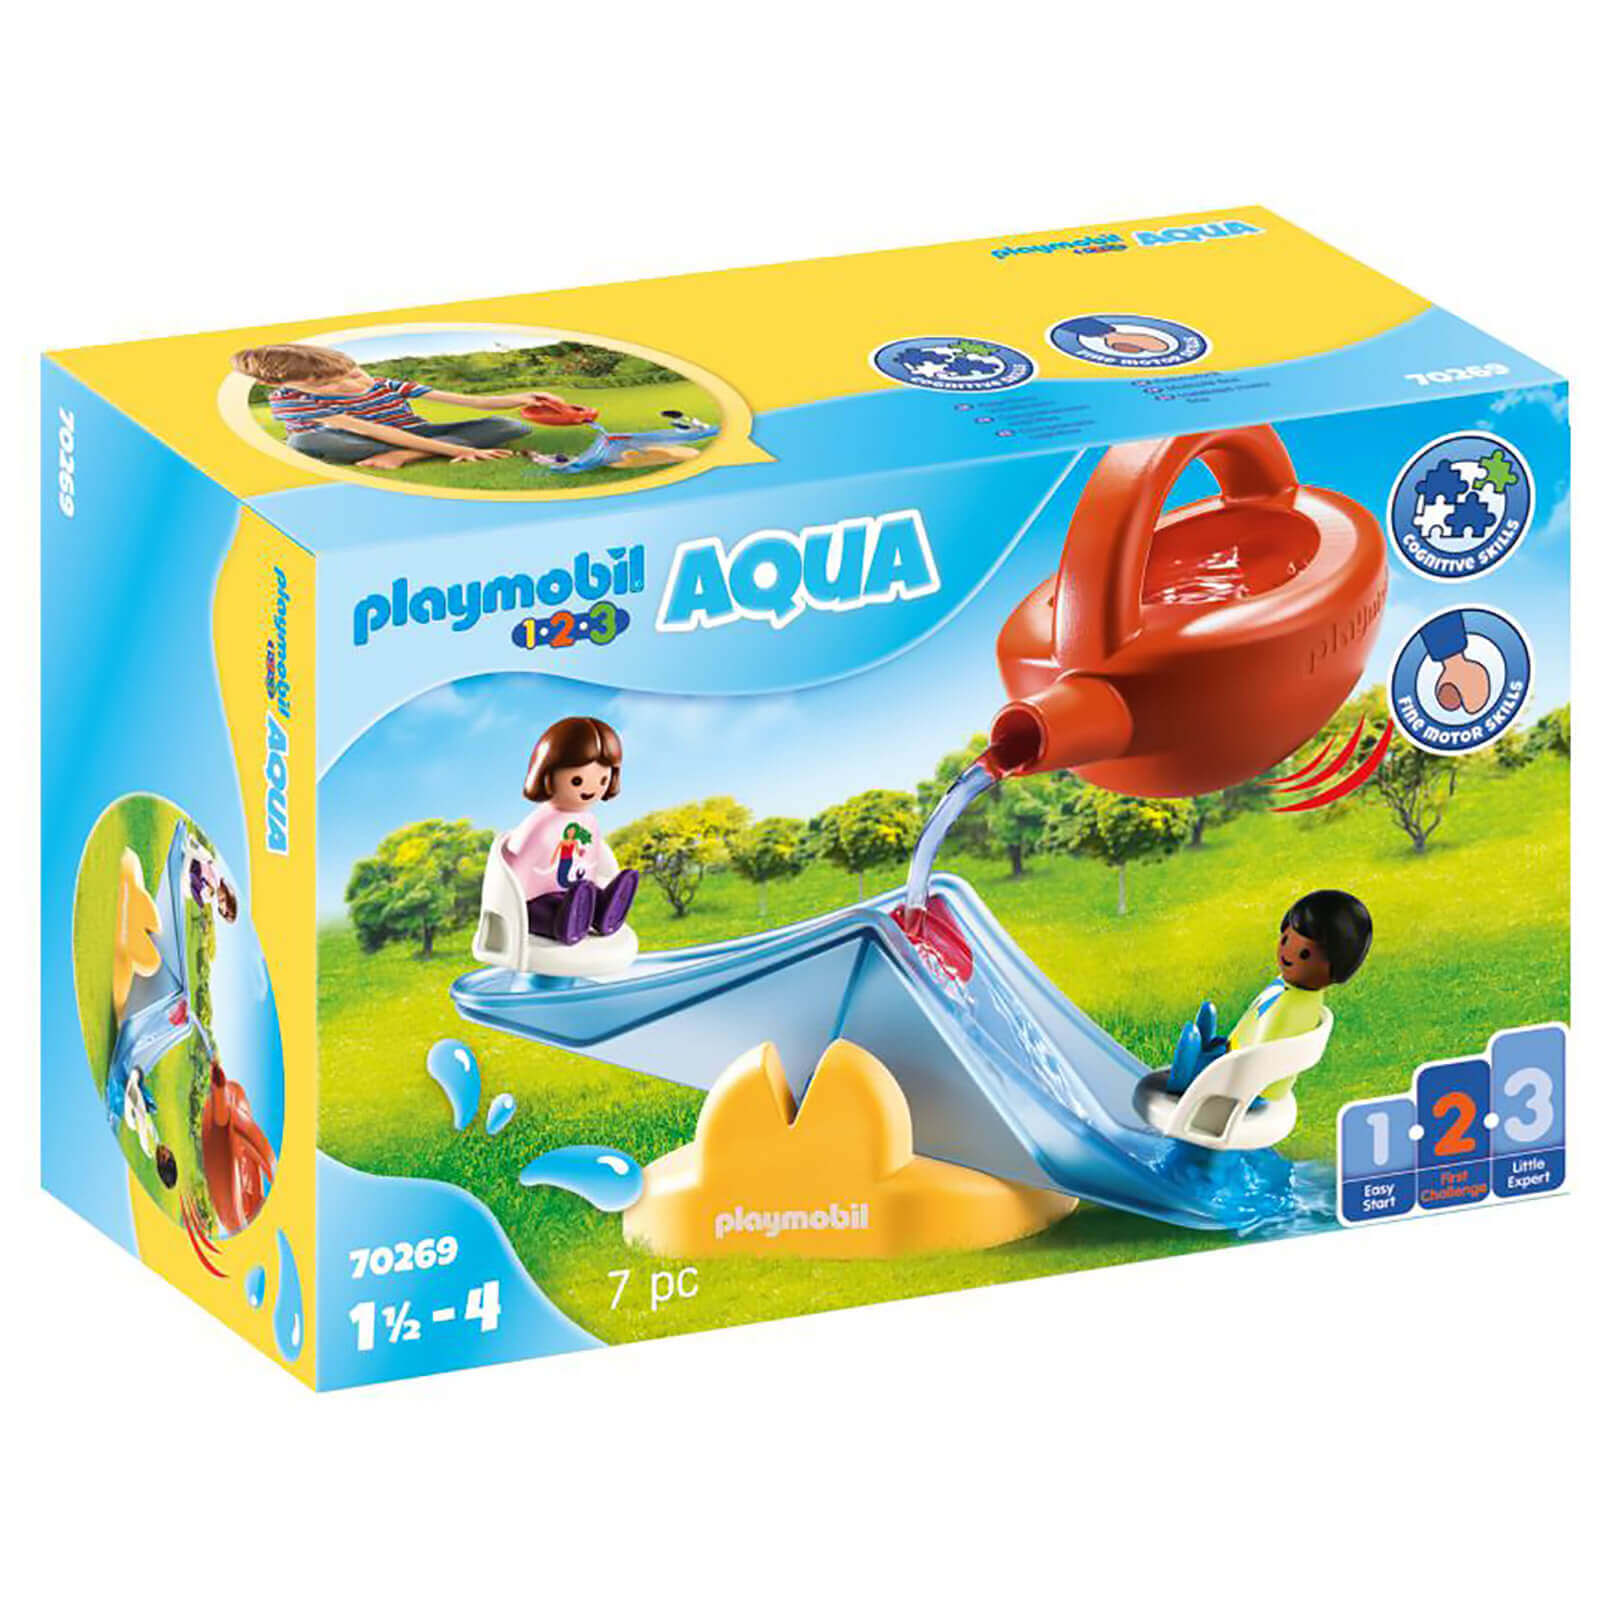 Image of Playmobil 70269 1.2.3 Aqua Water Seesaw with Watering Can Playset